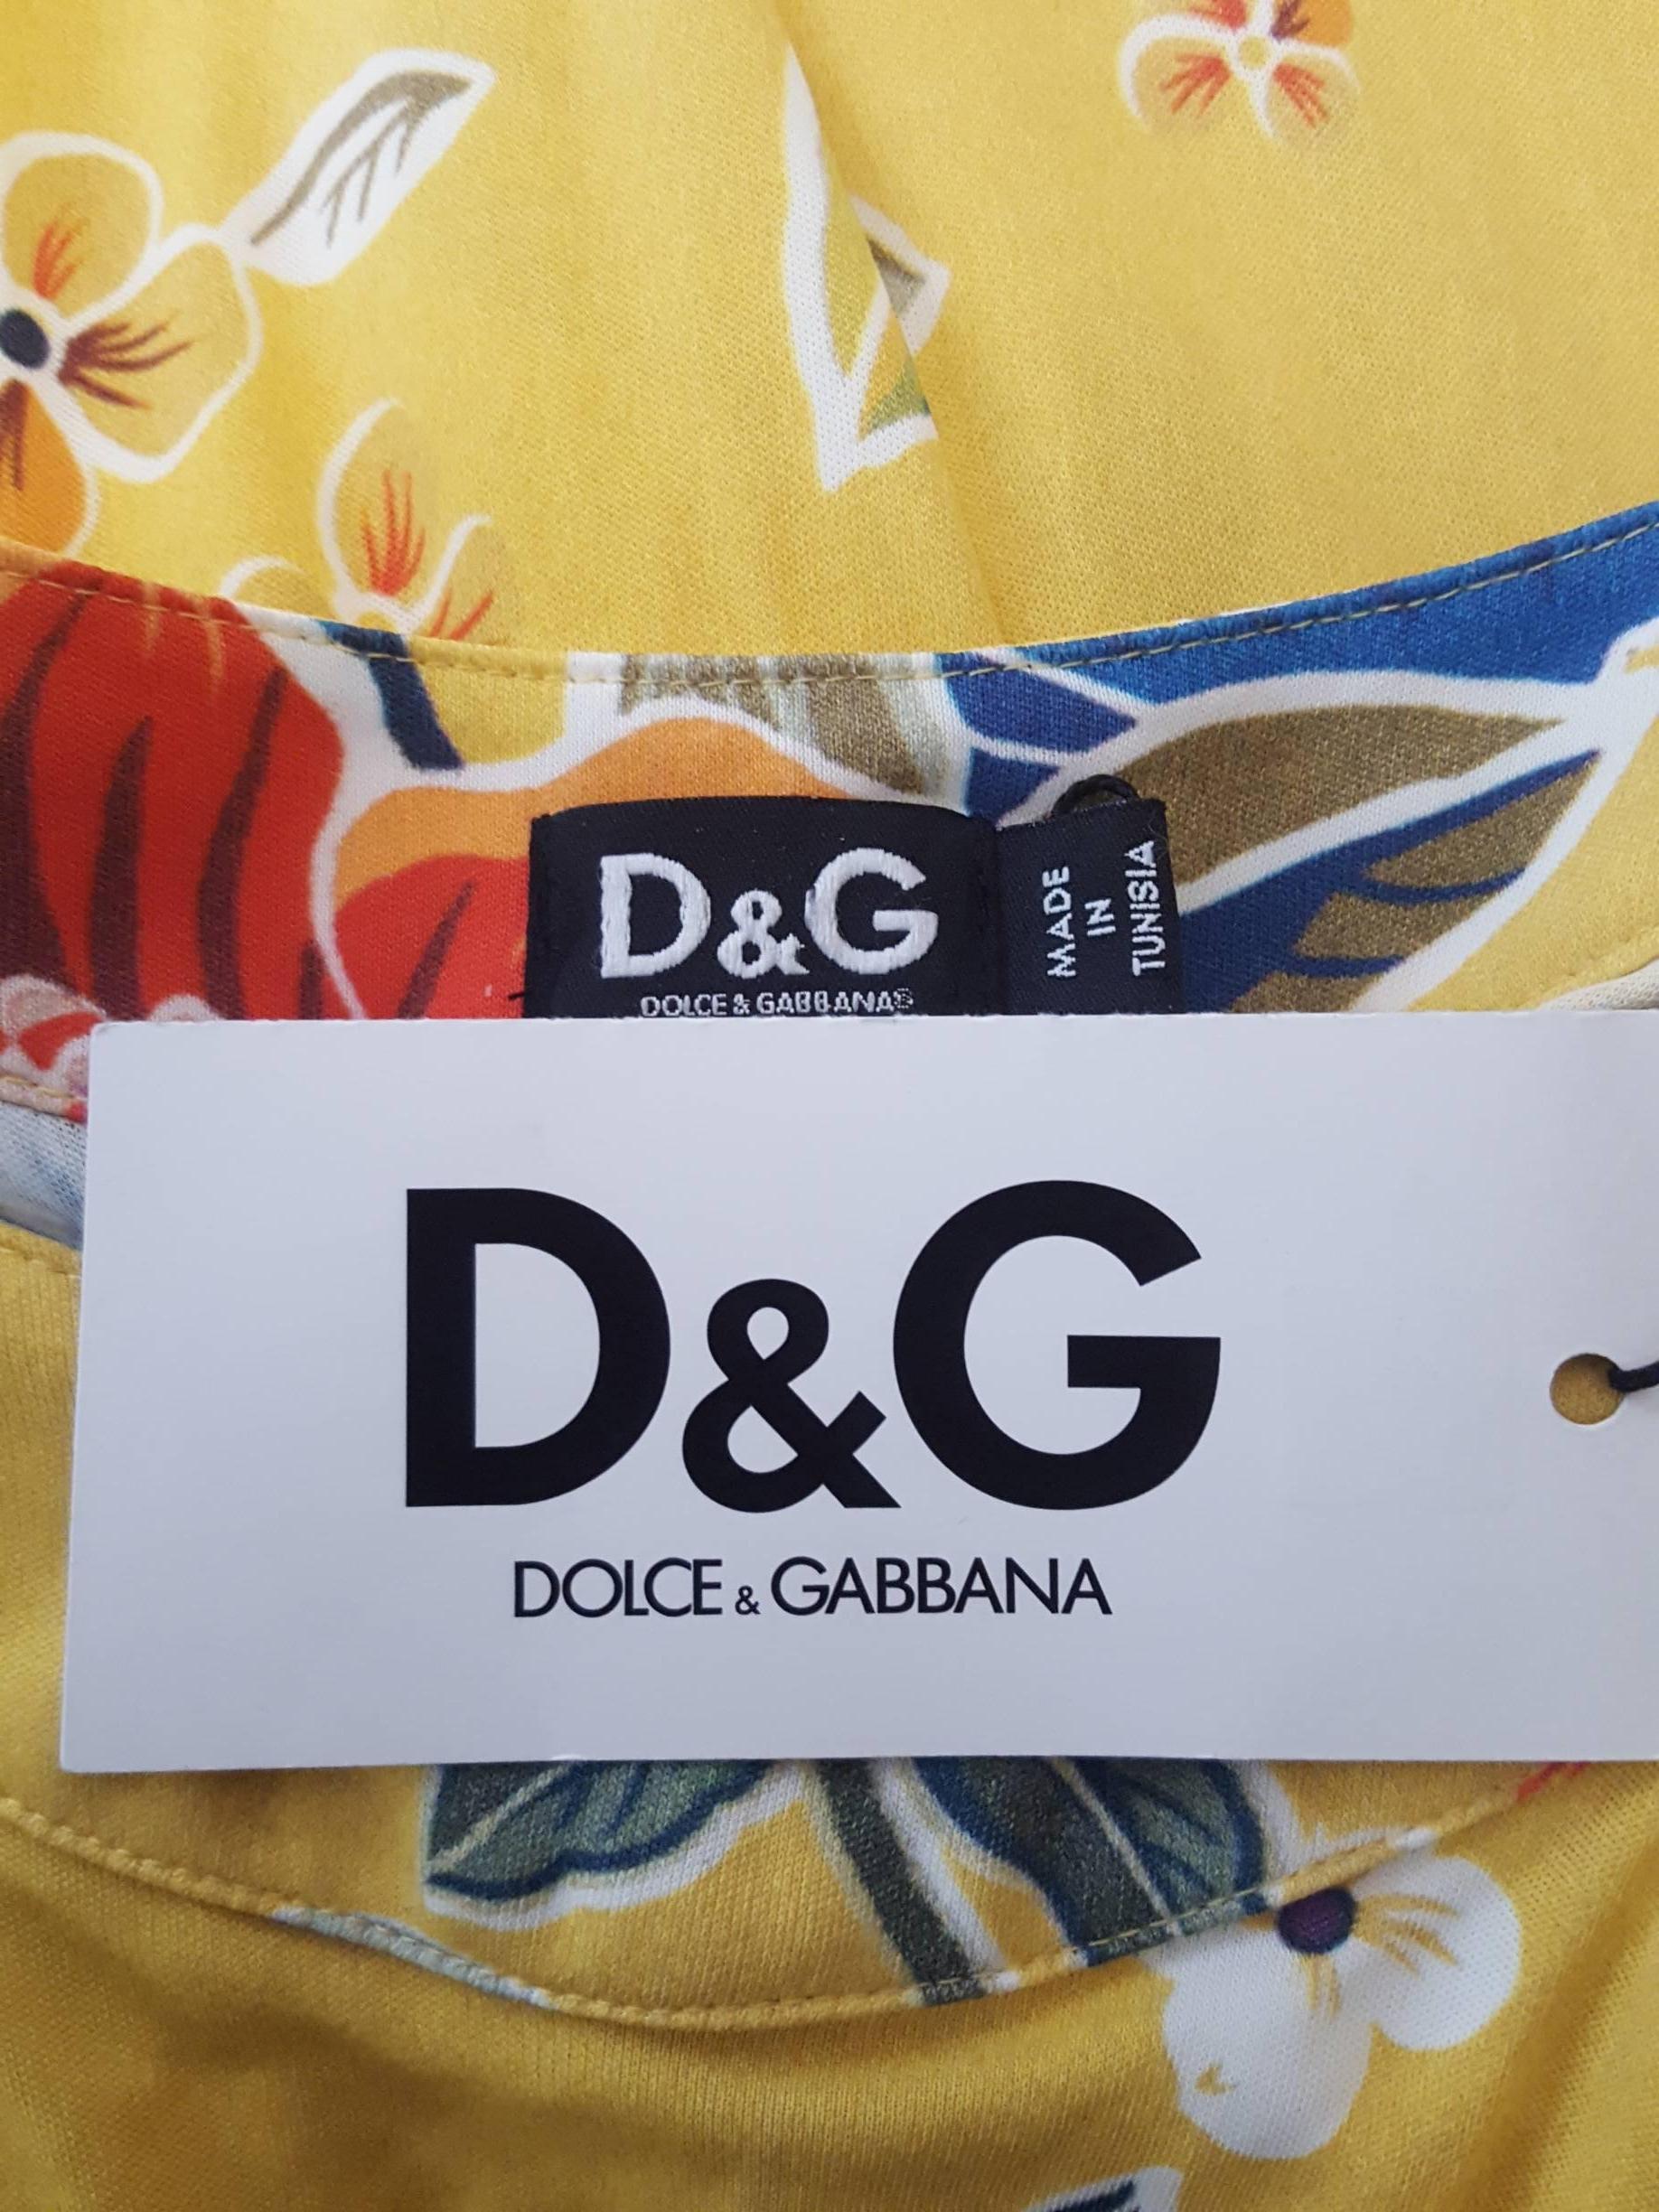 D&G Dolce & Gabbana Yellow Floral Empire Waist Dress with Gold Tone Leather Belt In New Condition For Sale In Palm Beach, FL